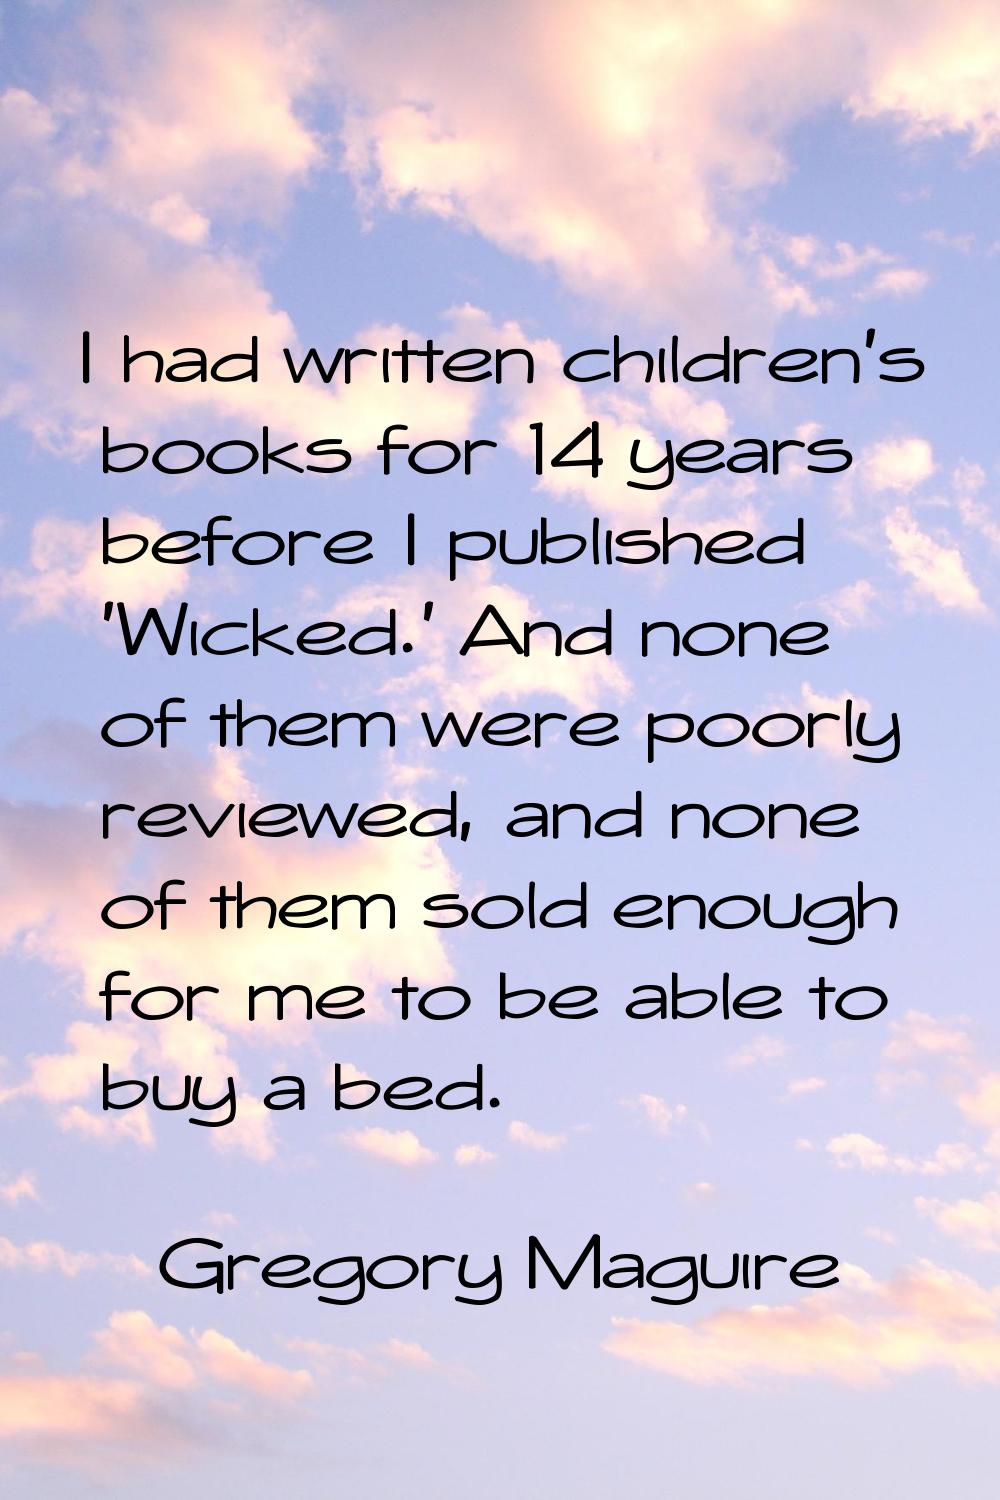 I had written children's books for 14 years before I published 'Wicked.' And none of them were poor